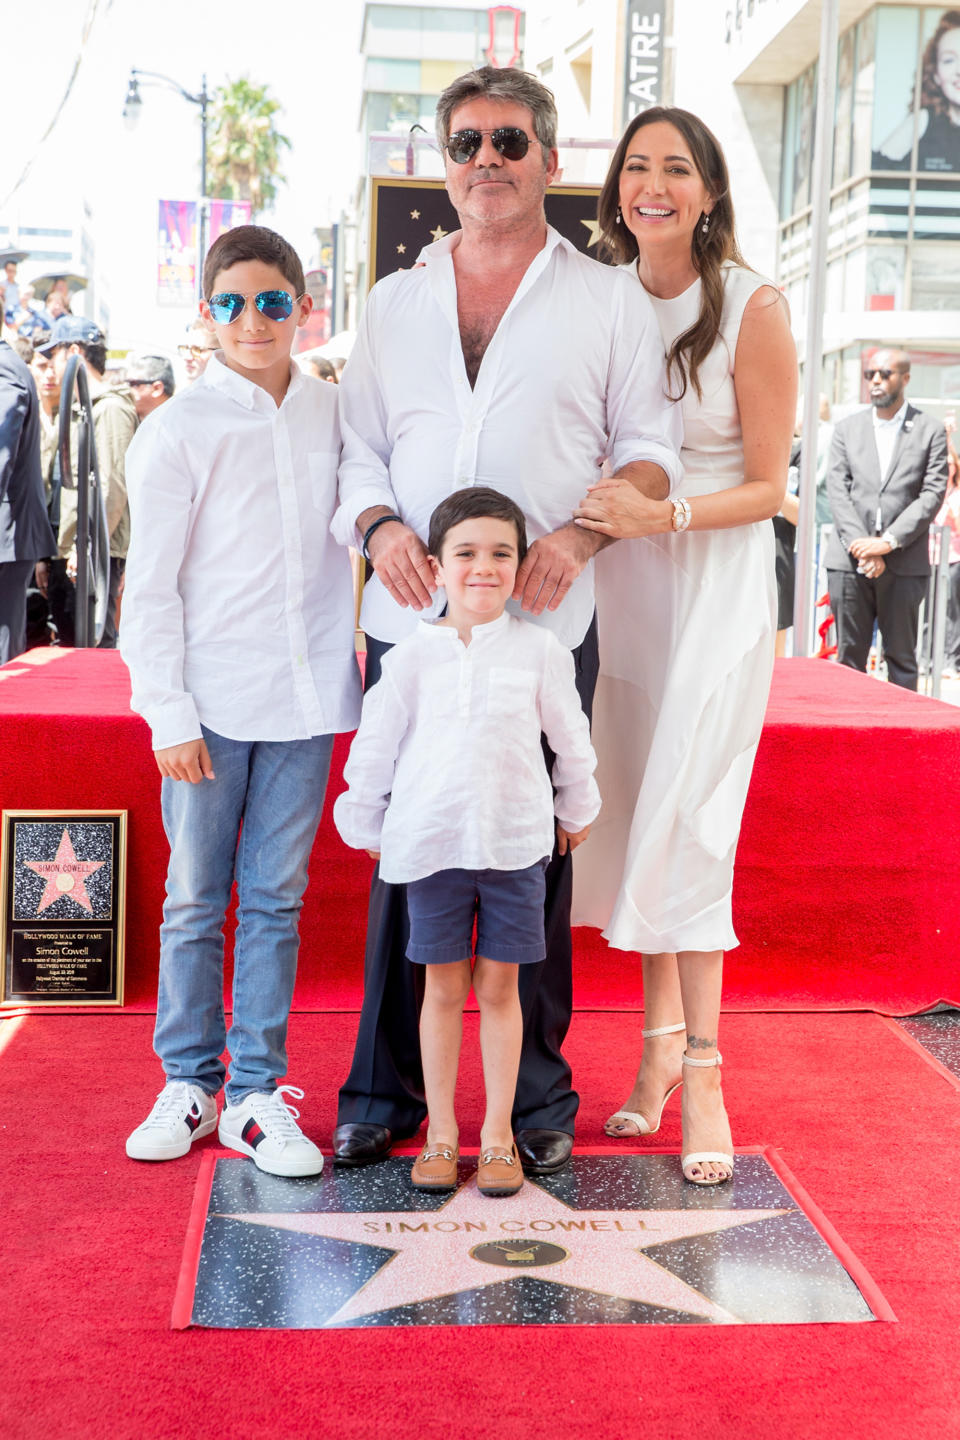 Simon Cowell with partner Lauren Silverman, their son, Eric, center, and her son, Adam. Yes, the boys wore white button-downs just like Simon, who is never without one. (Photo: Rich Fury/Getty Images)